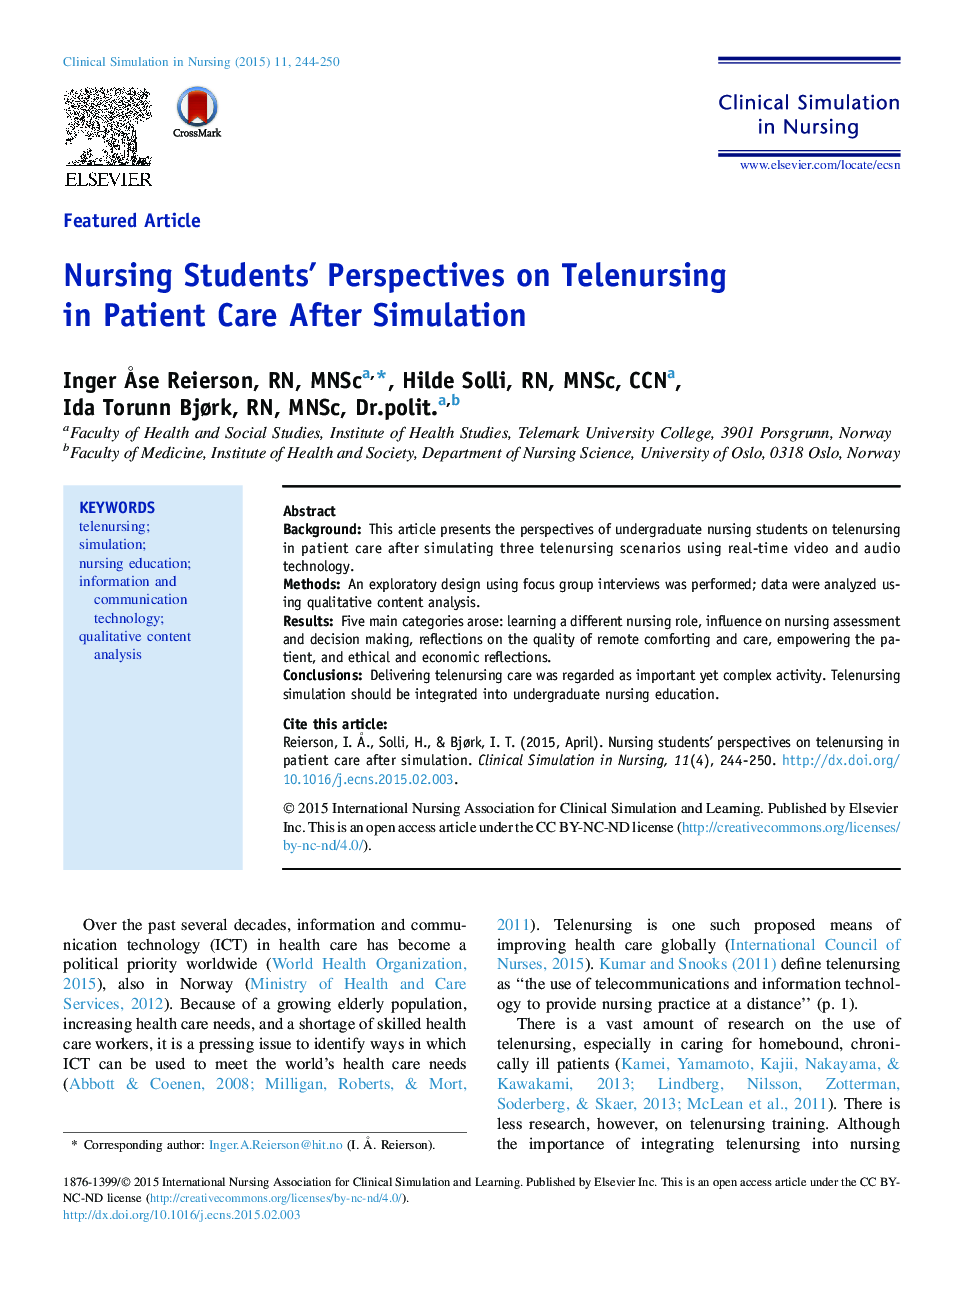 Featured ArticleNursing Students' Perspectives on Telenursing in Patient Care After Simulation